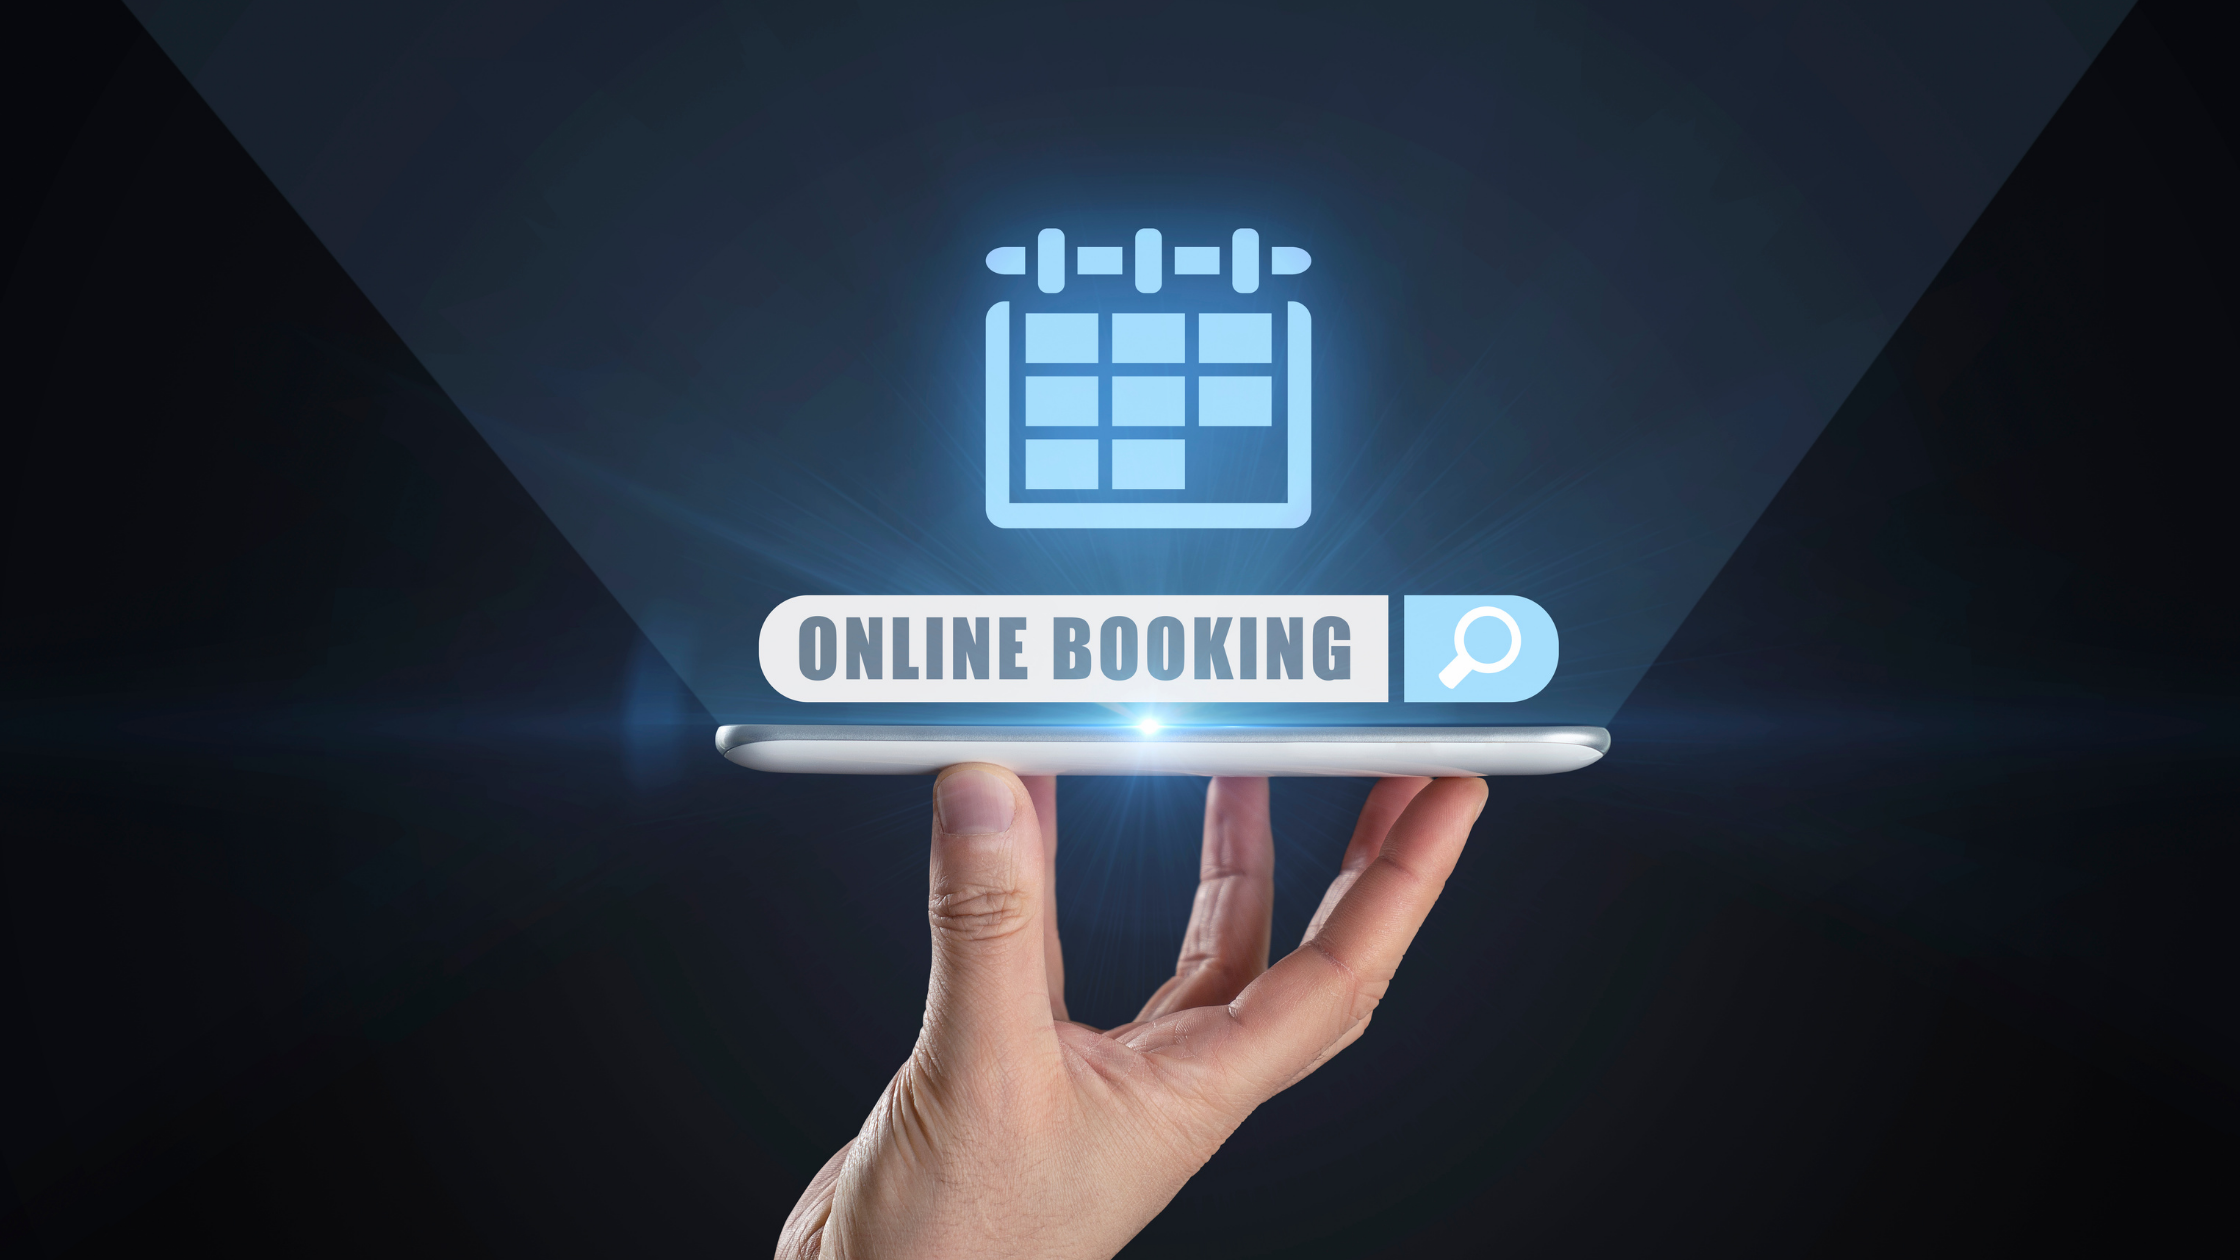 5 Things You Should Check Before You Book a Hotel Online